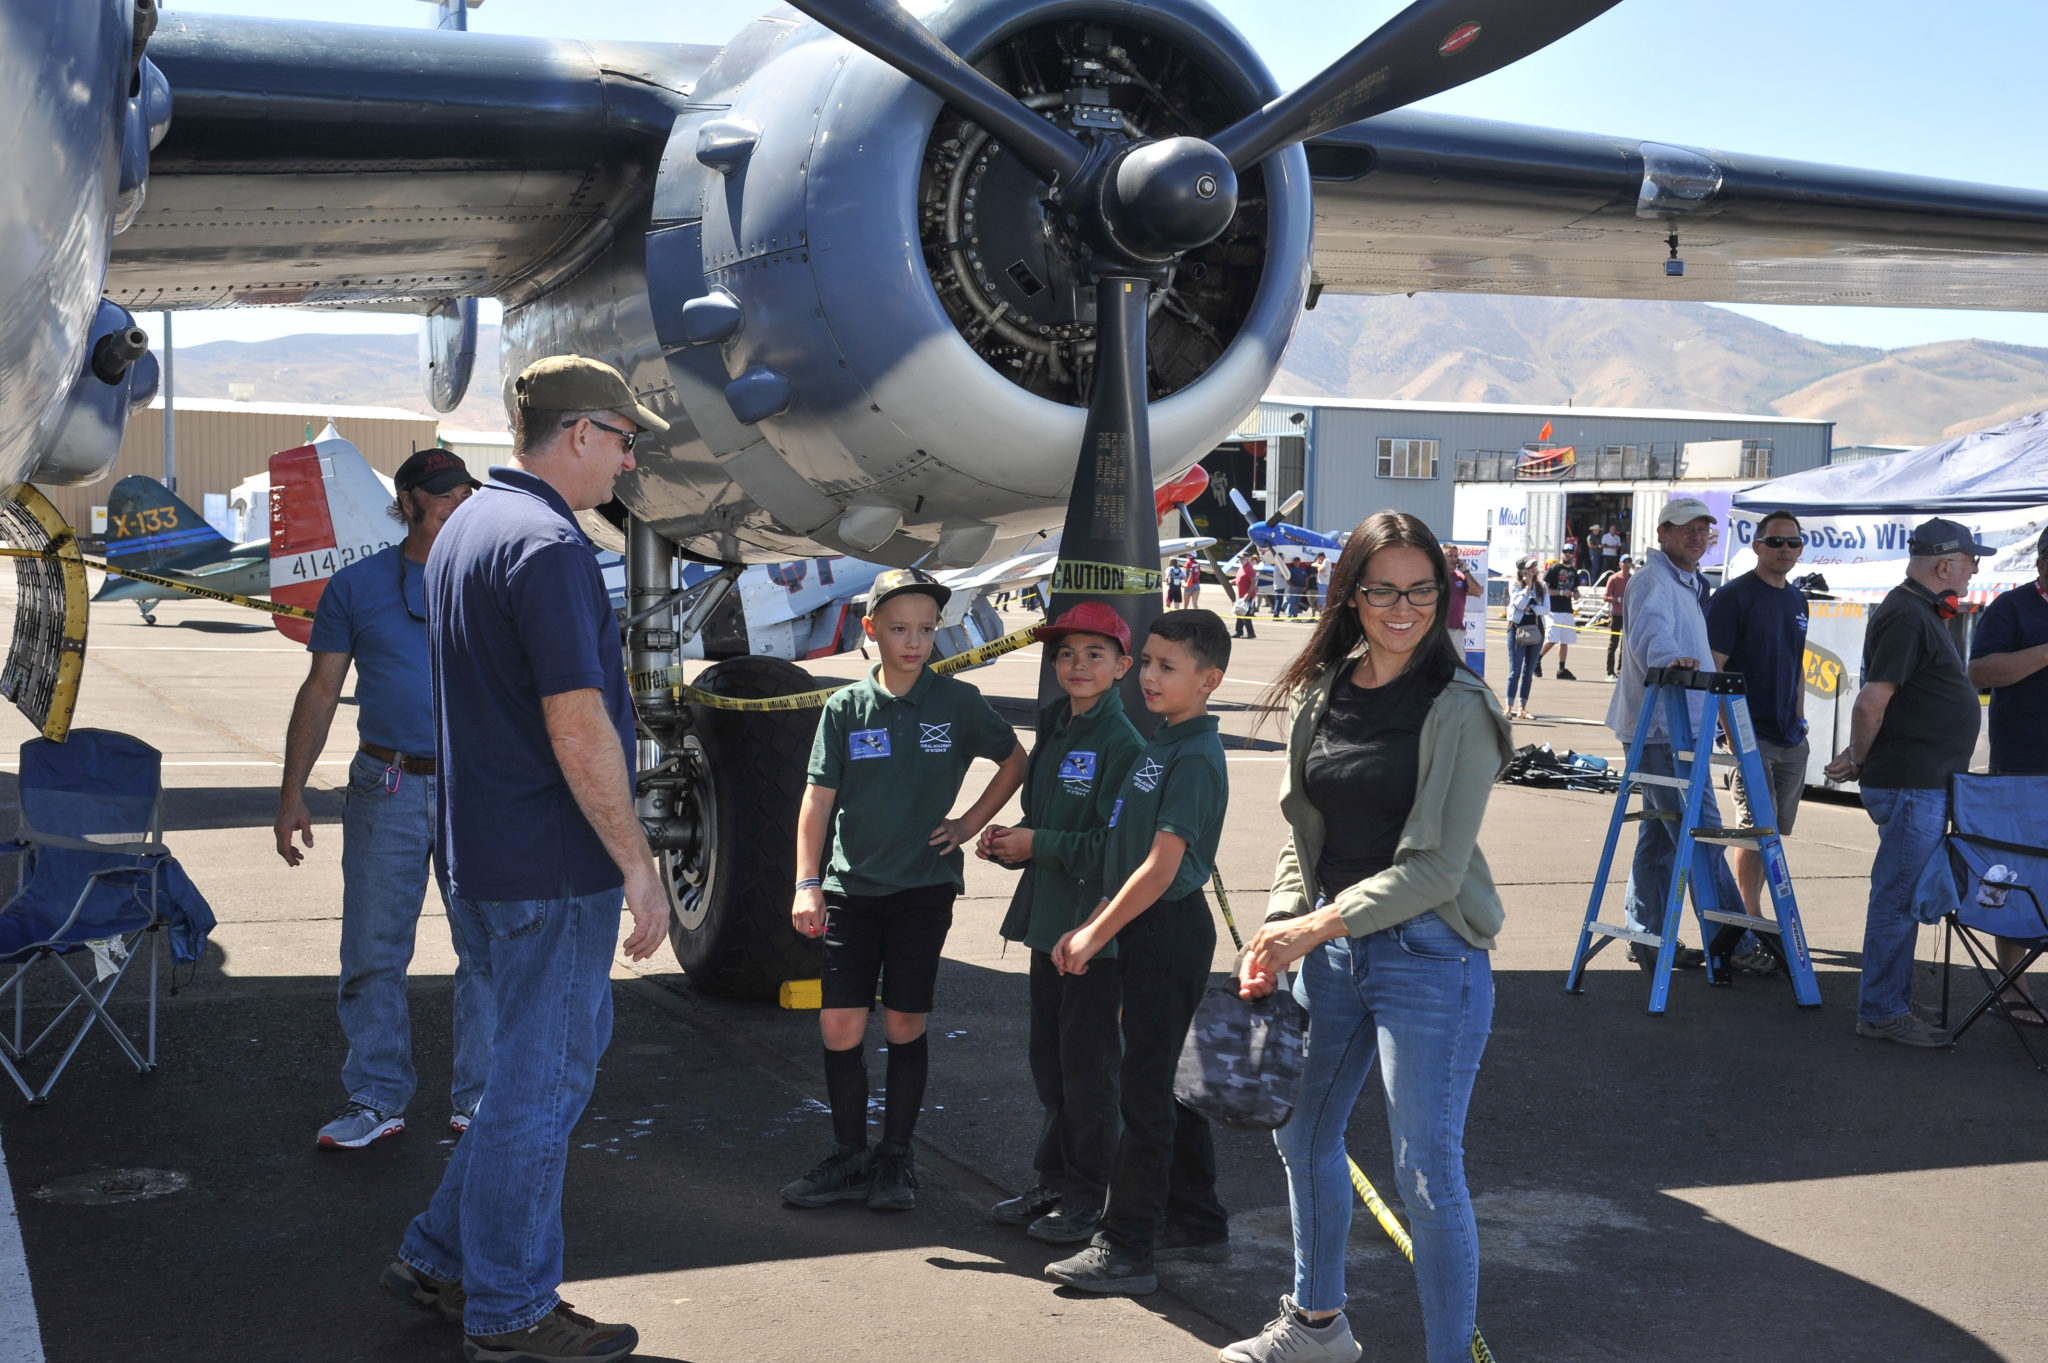 What Makes the Reno Air Races a Family Event National Championship